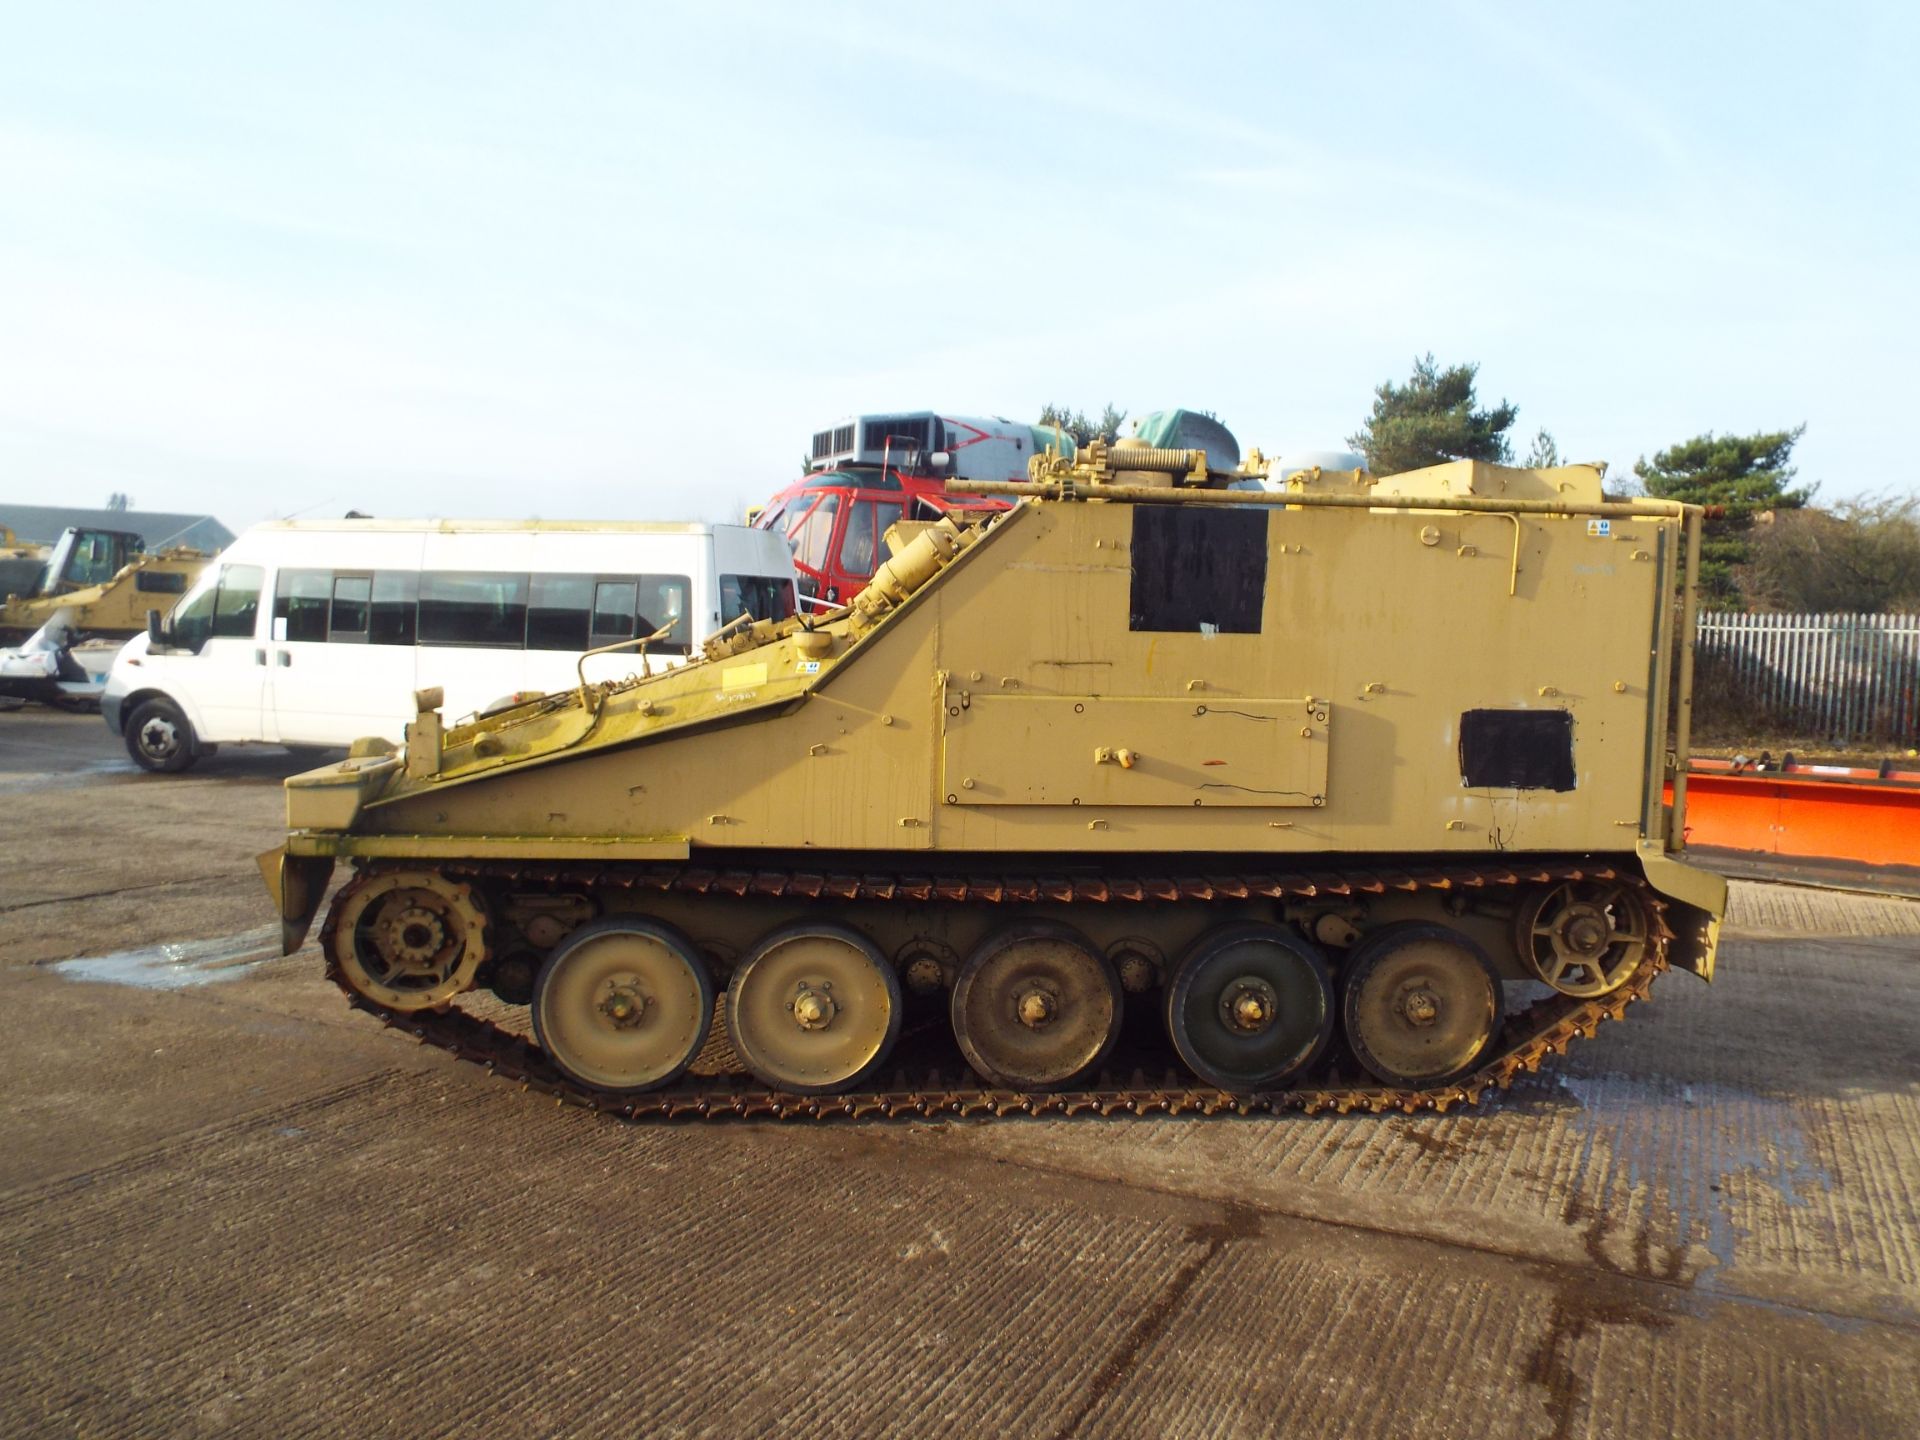 FV105 Sultan Armoured Personnel Carrier - Image 4 of 28